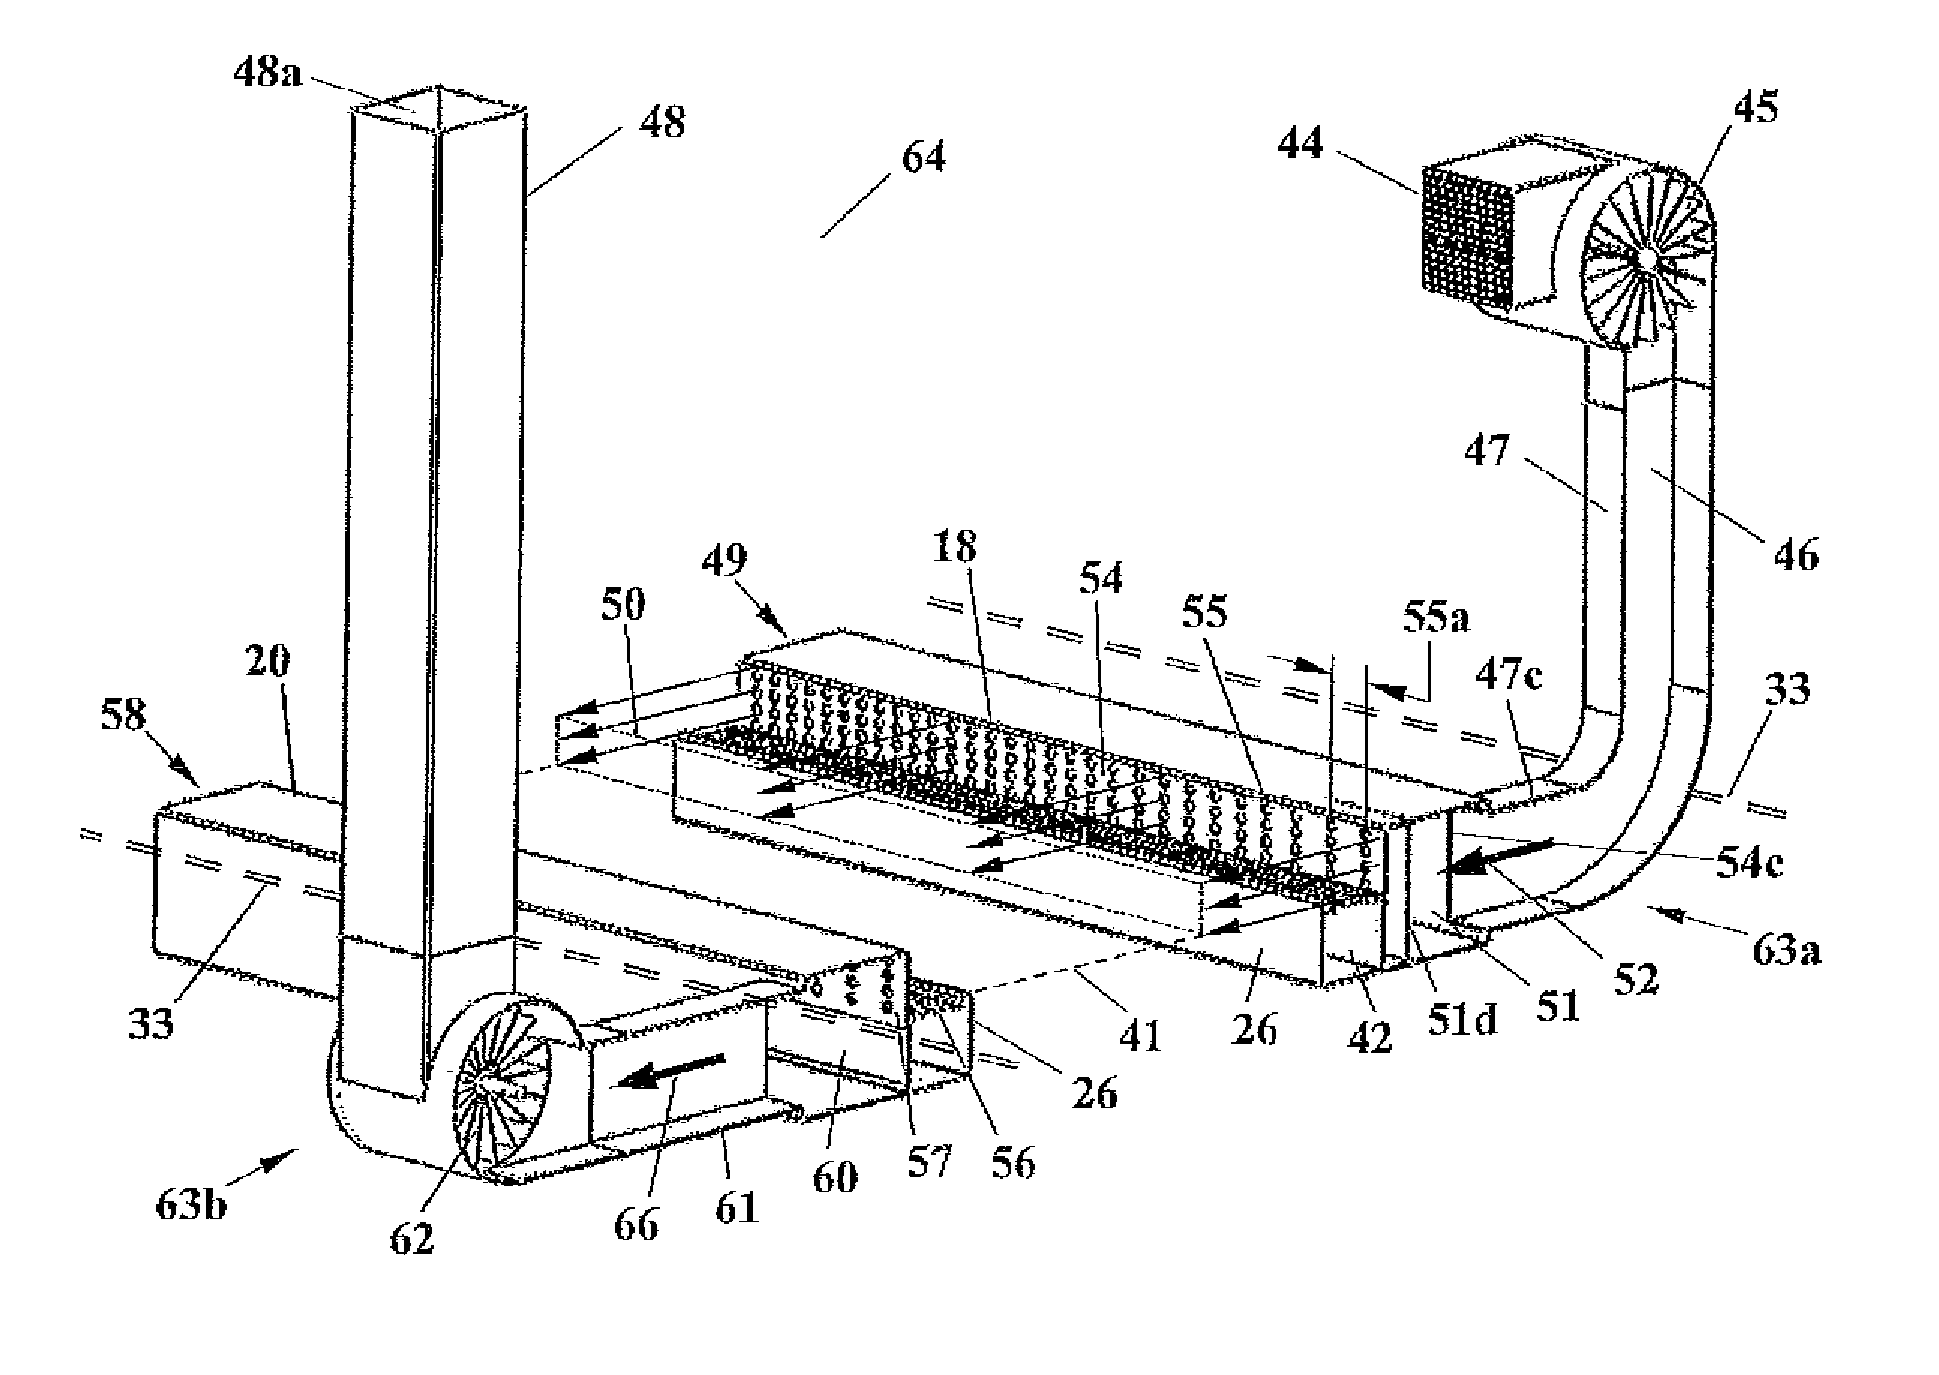 Self-contained system for scavenging contaminated air from above the water surface of an indoor swimming pool